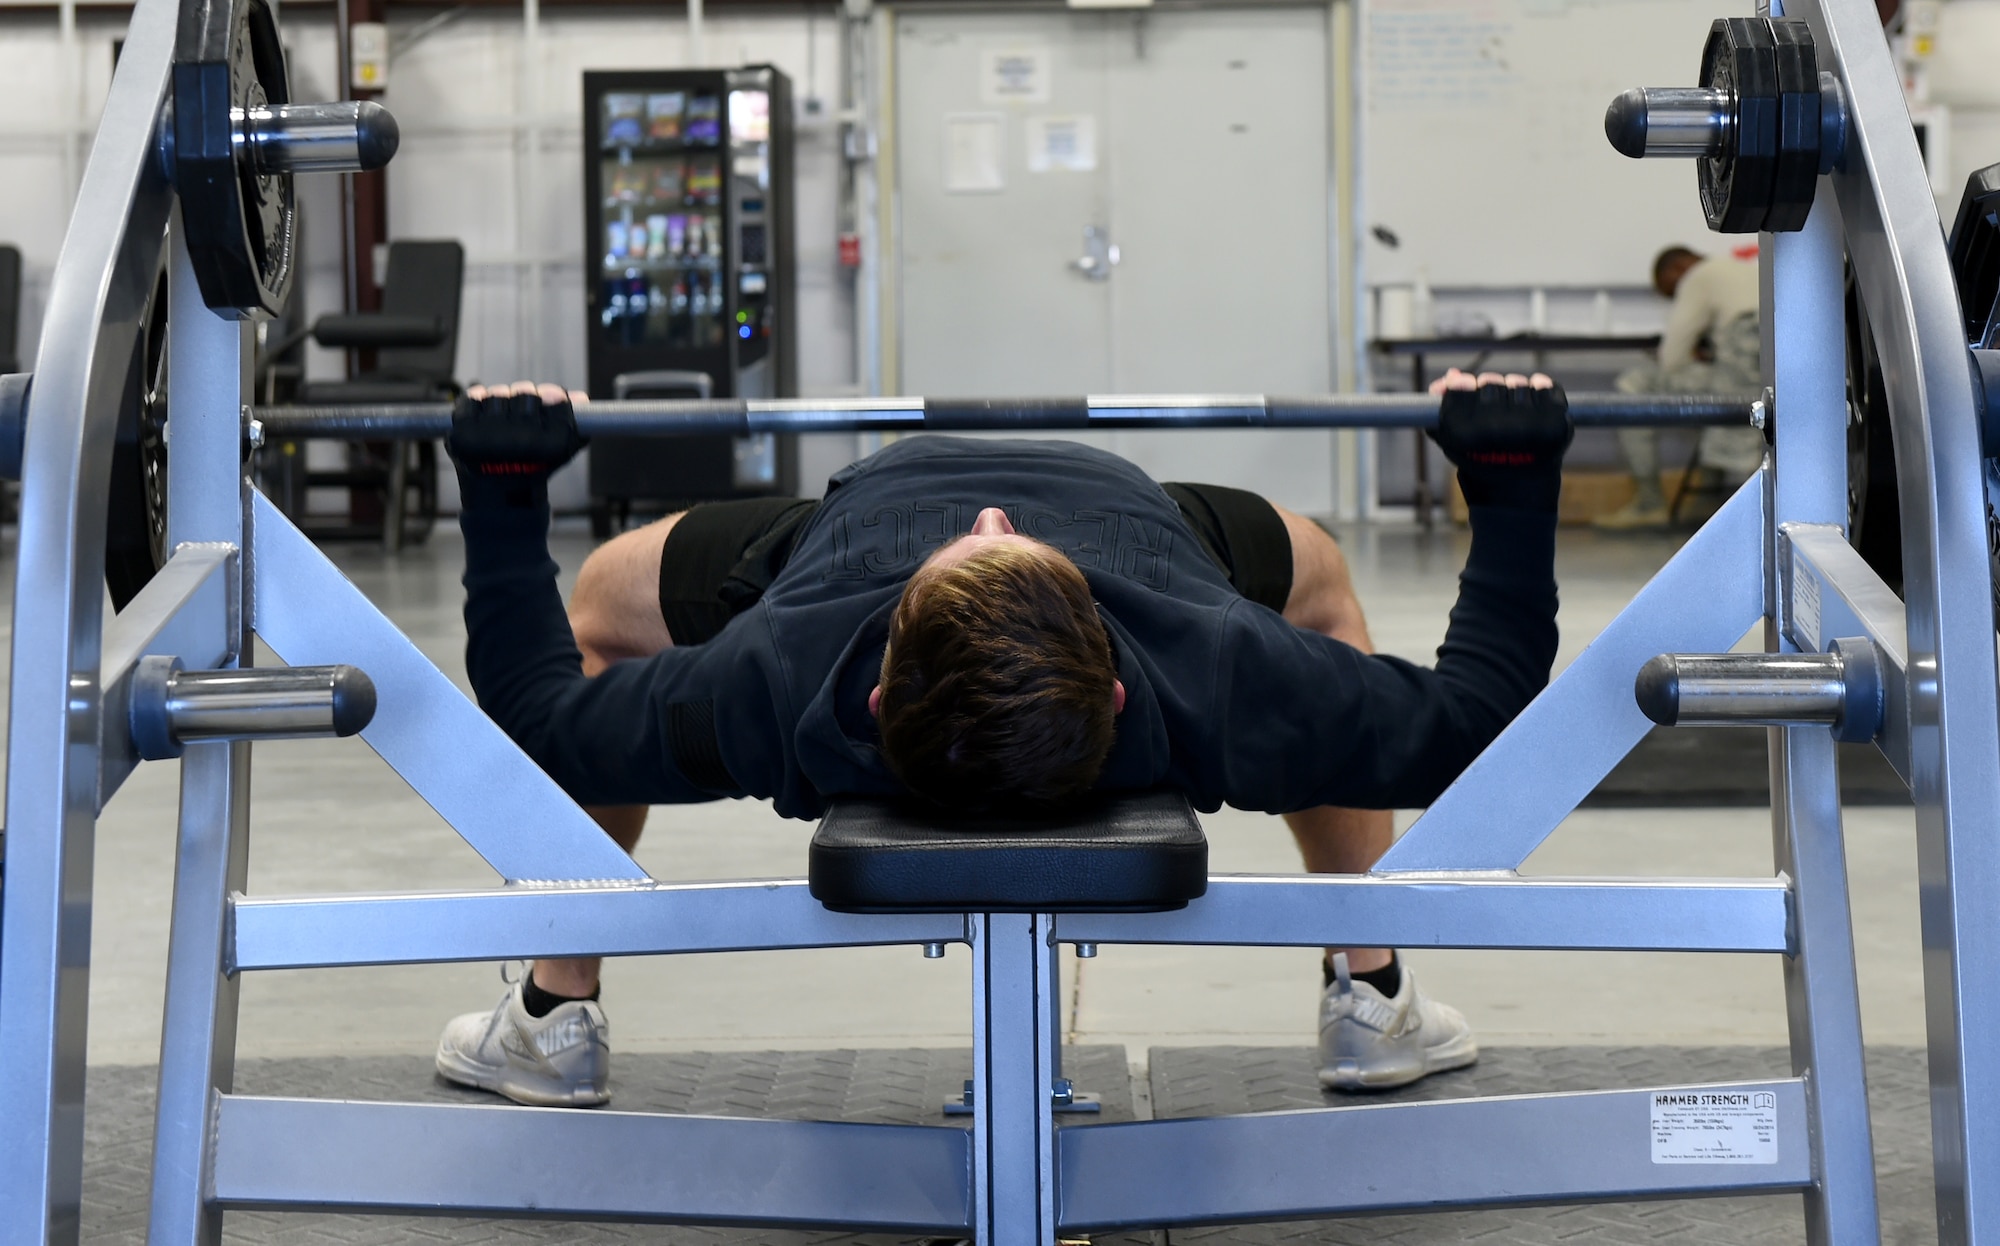 Airman 1st Class Carl, 22nd Attack Squadron sensor operator, performs bench presses in the Reaper Fitness Center at Creech Air Force Base, Nevada, Oct. 16, 2019. The Reaper Fitness Center is being renovated with male and female restrooms that include showers. (U.S. Air Force photo by Airman 1st Class William Rio Rosado)